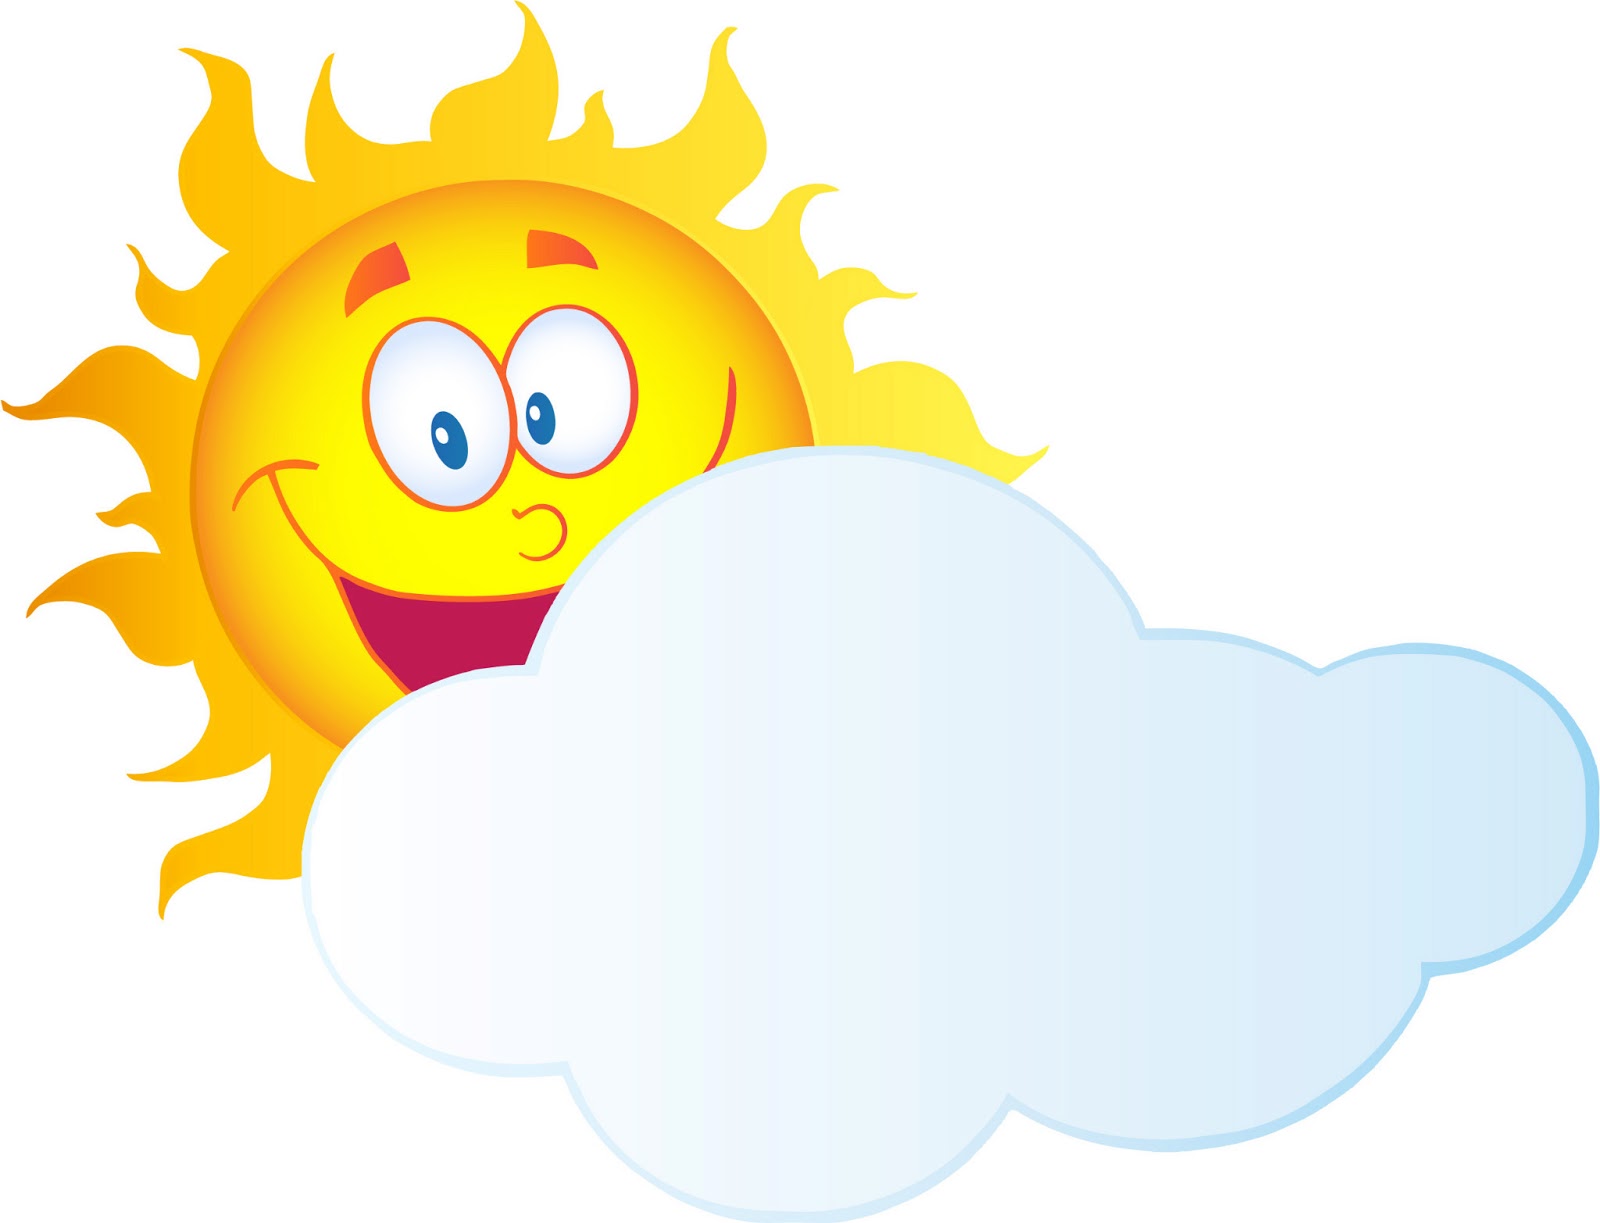 Sunshine with cloud clipart